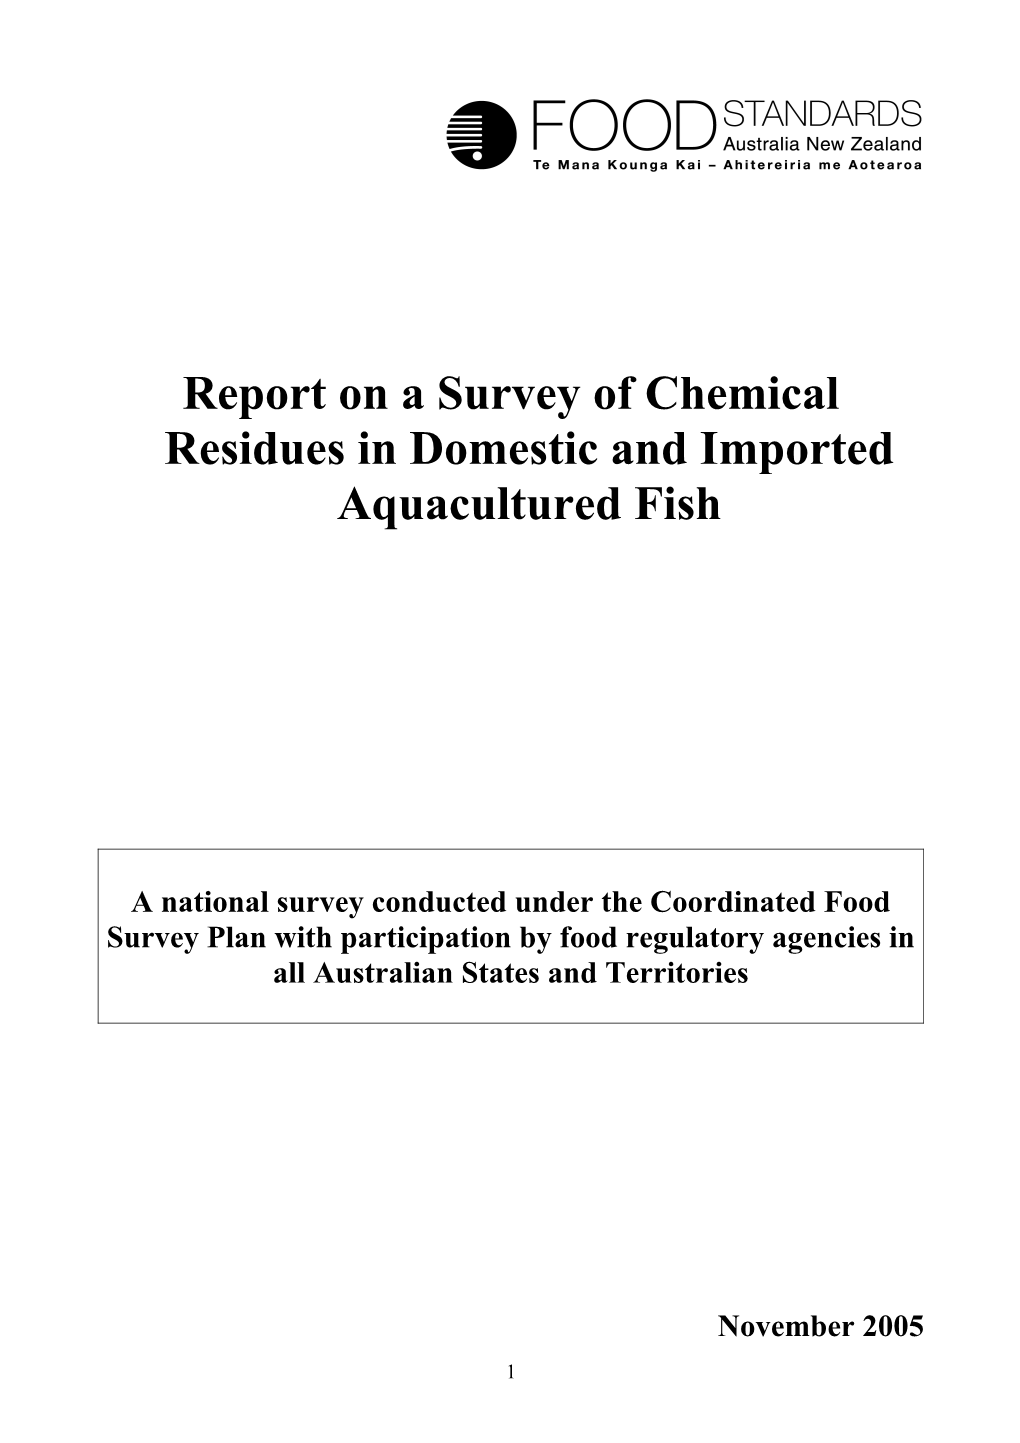 Report on a Survey of Chemical Residues in Domestic and Imported Aquacultured Fish